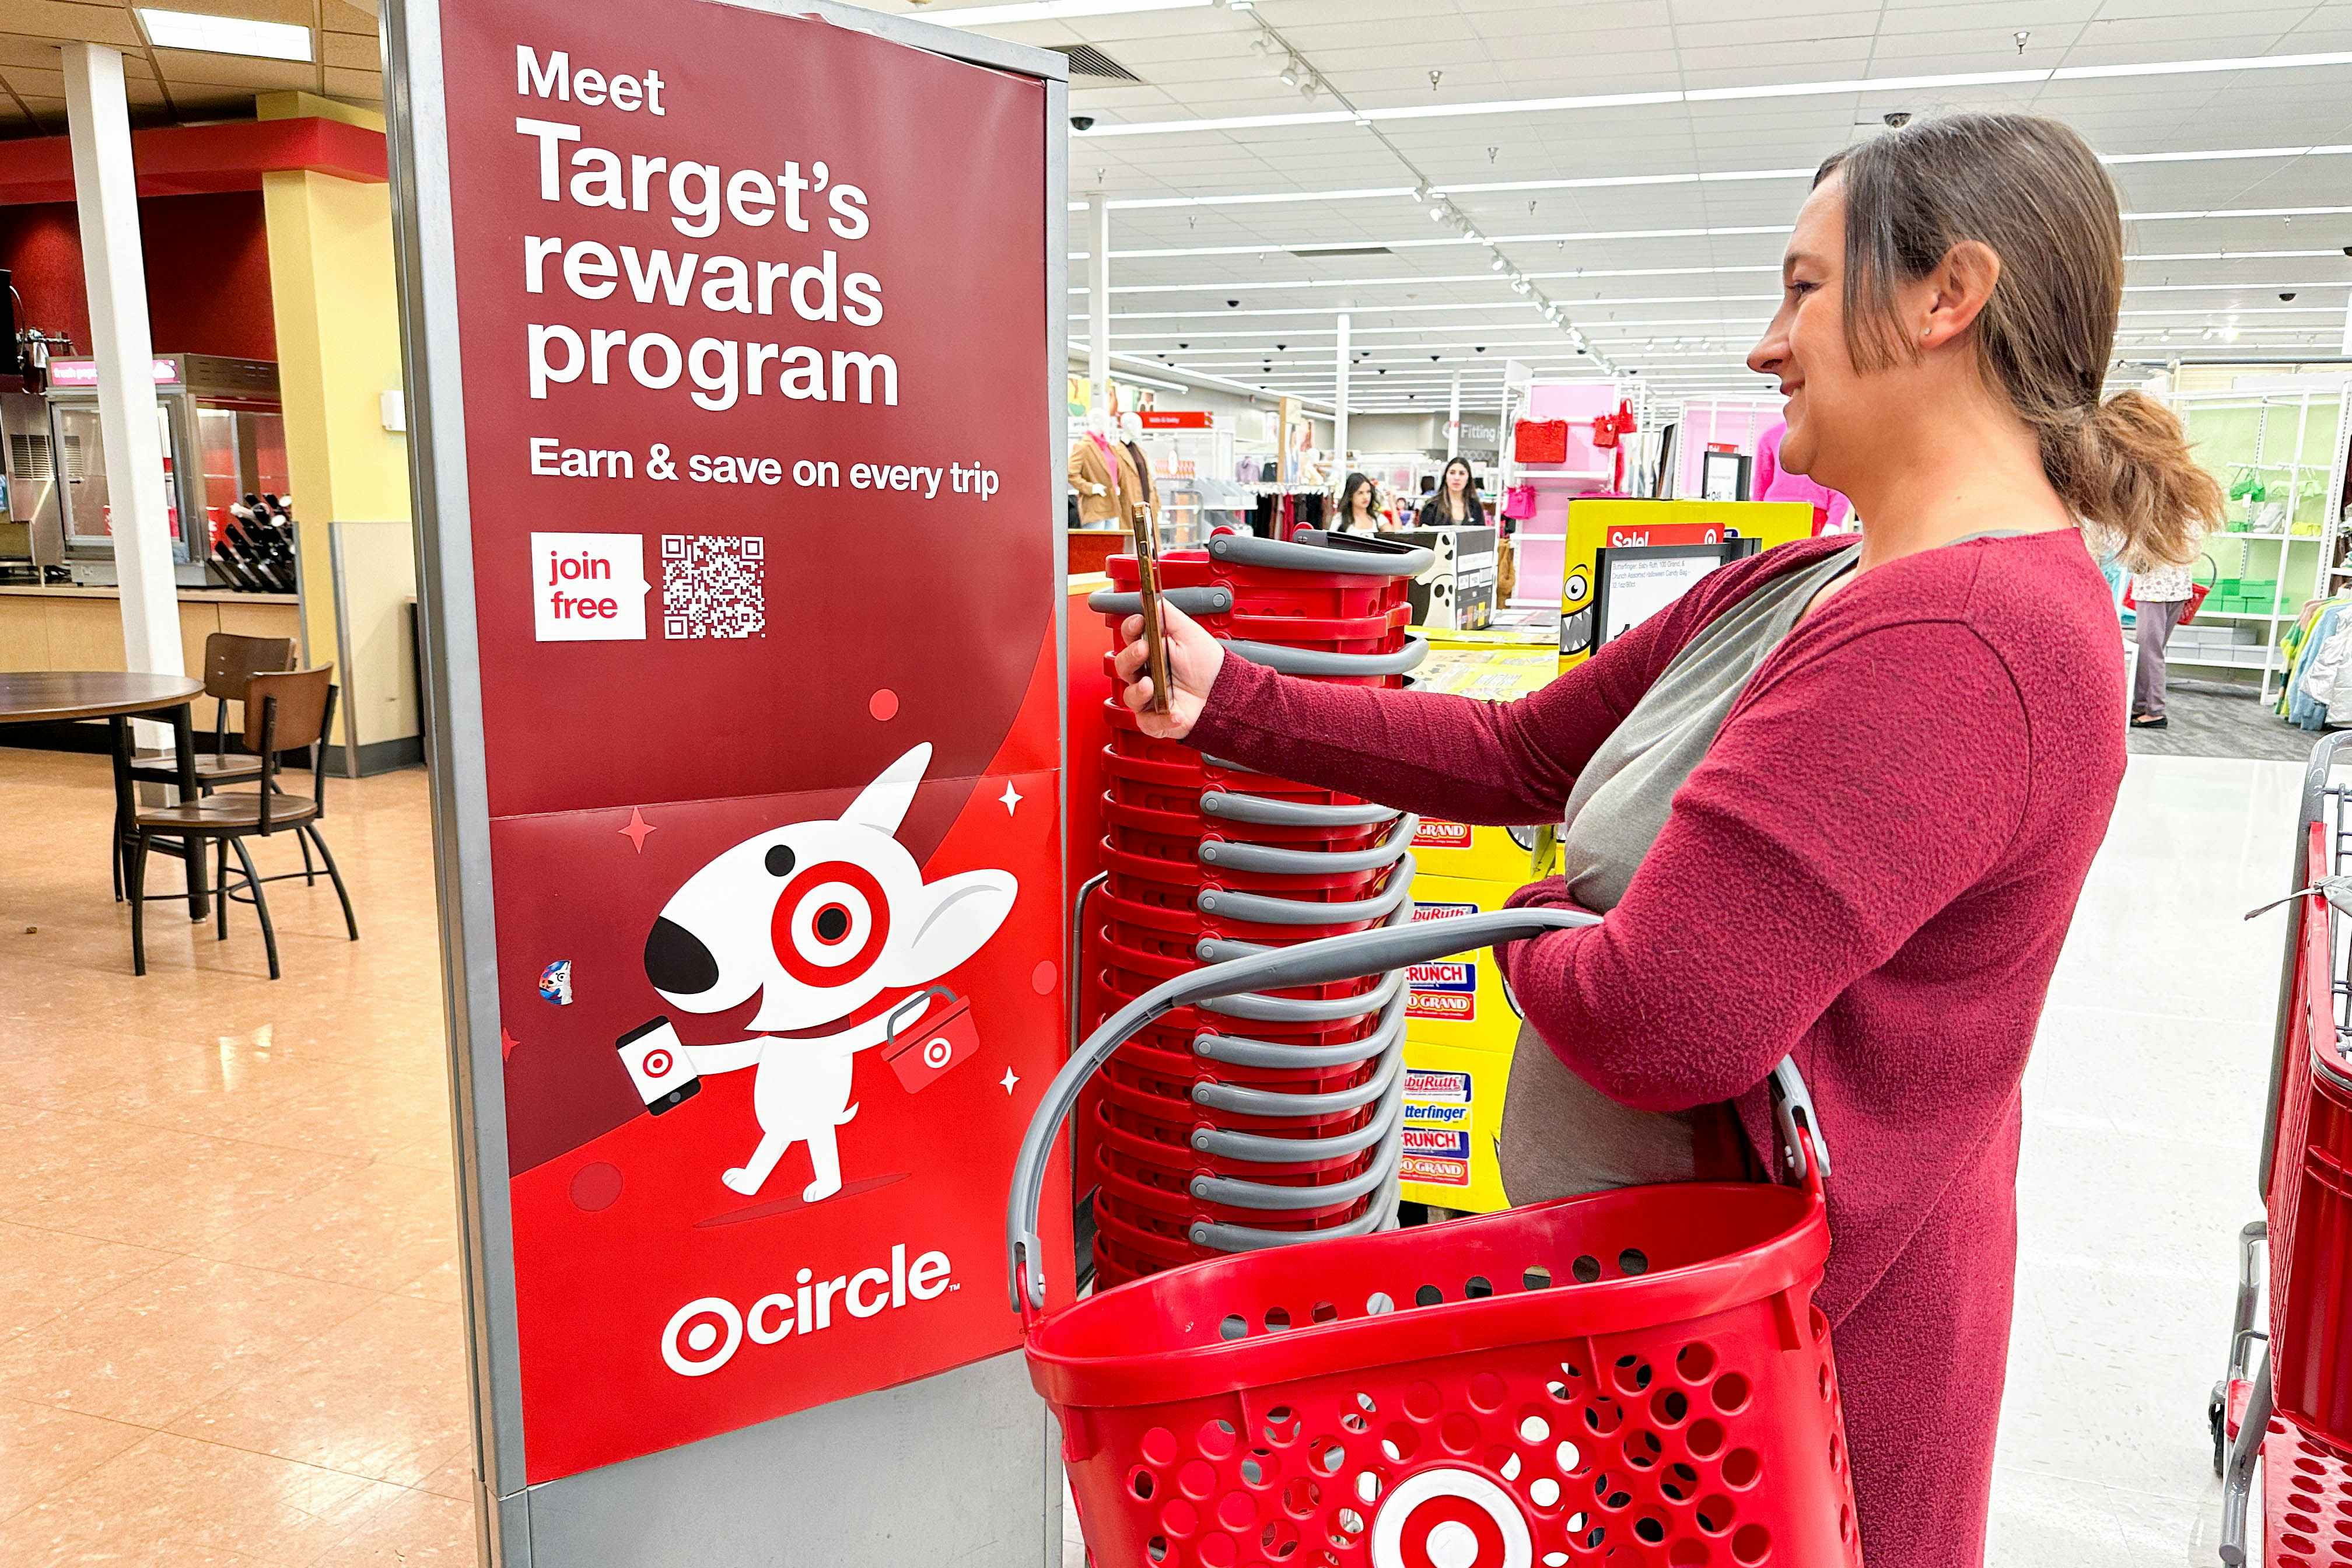 a woman scanning qr code on target signage